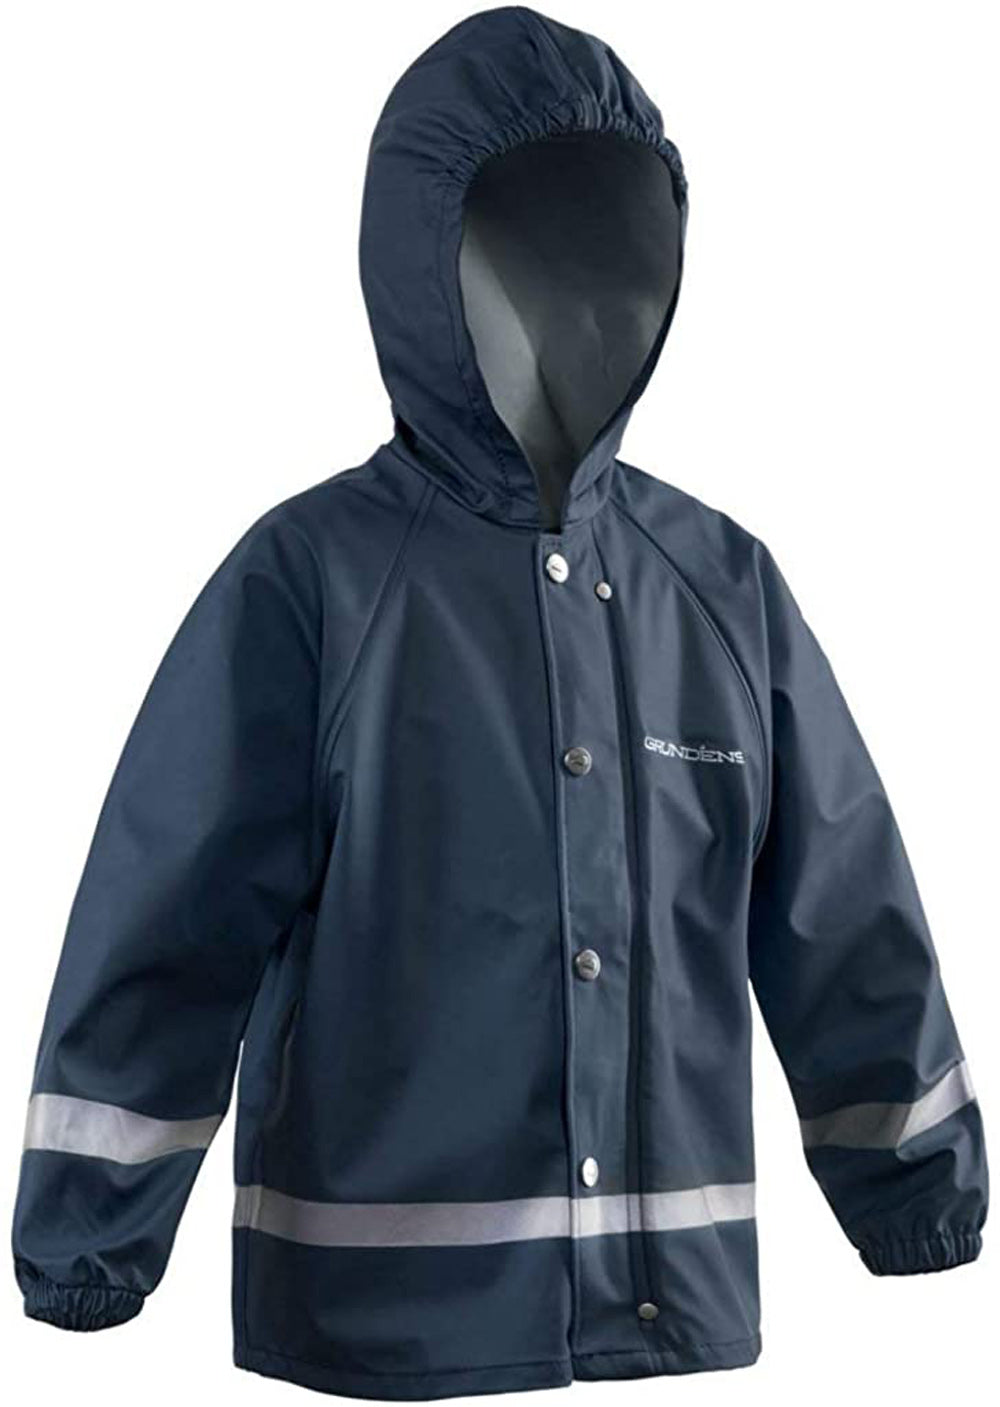 Zenith 293 Jacket in Blue color from the front view